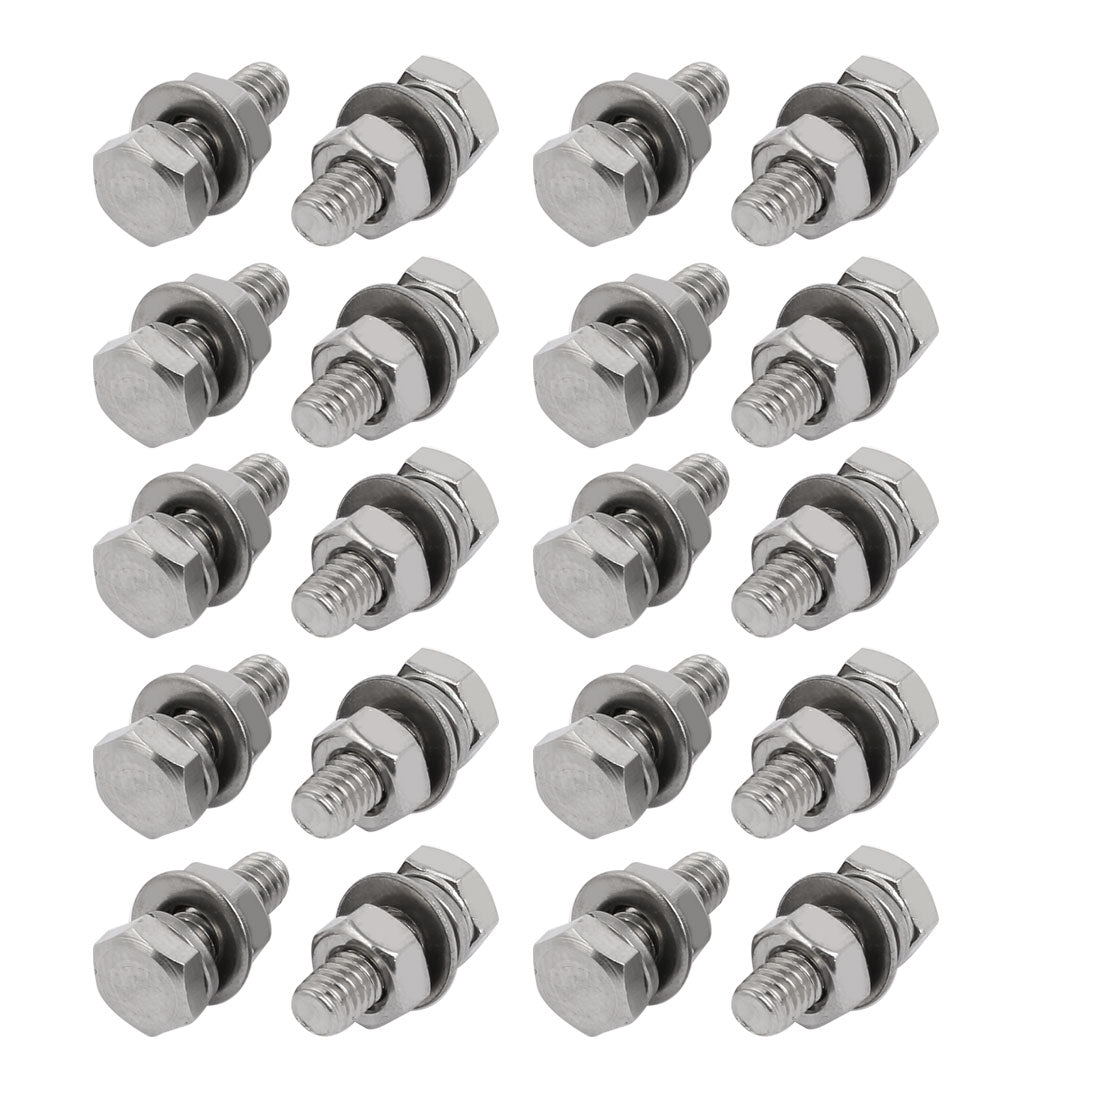 uxcell Uxcell 20pcs 304 Stainless Steel M4x12mm Hex Bolts w Nuts and Washers Assortment Kit